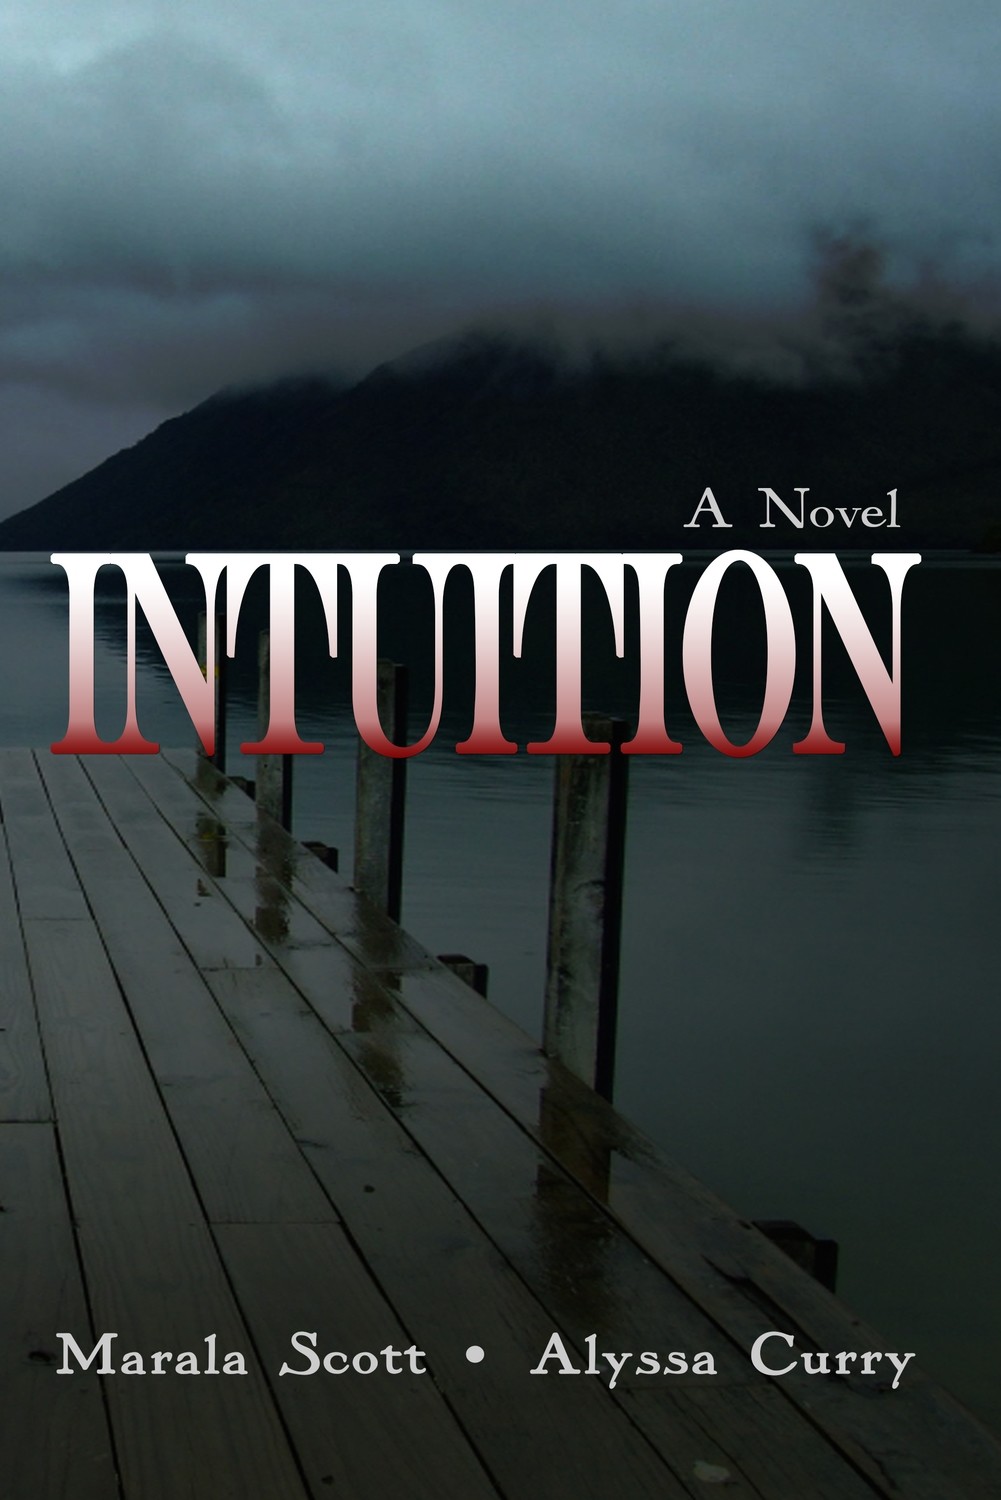 Intuition (Hardcover)